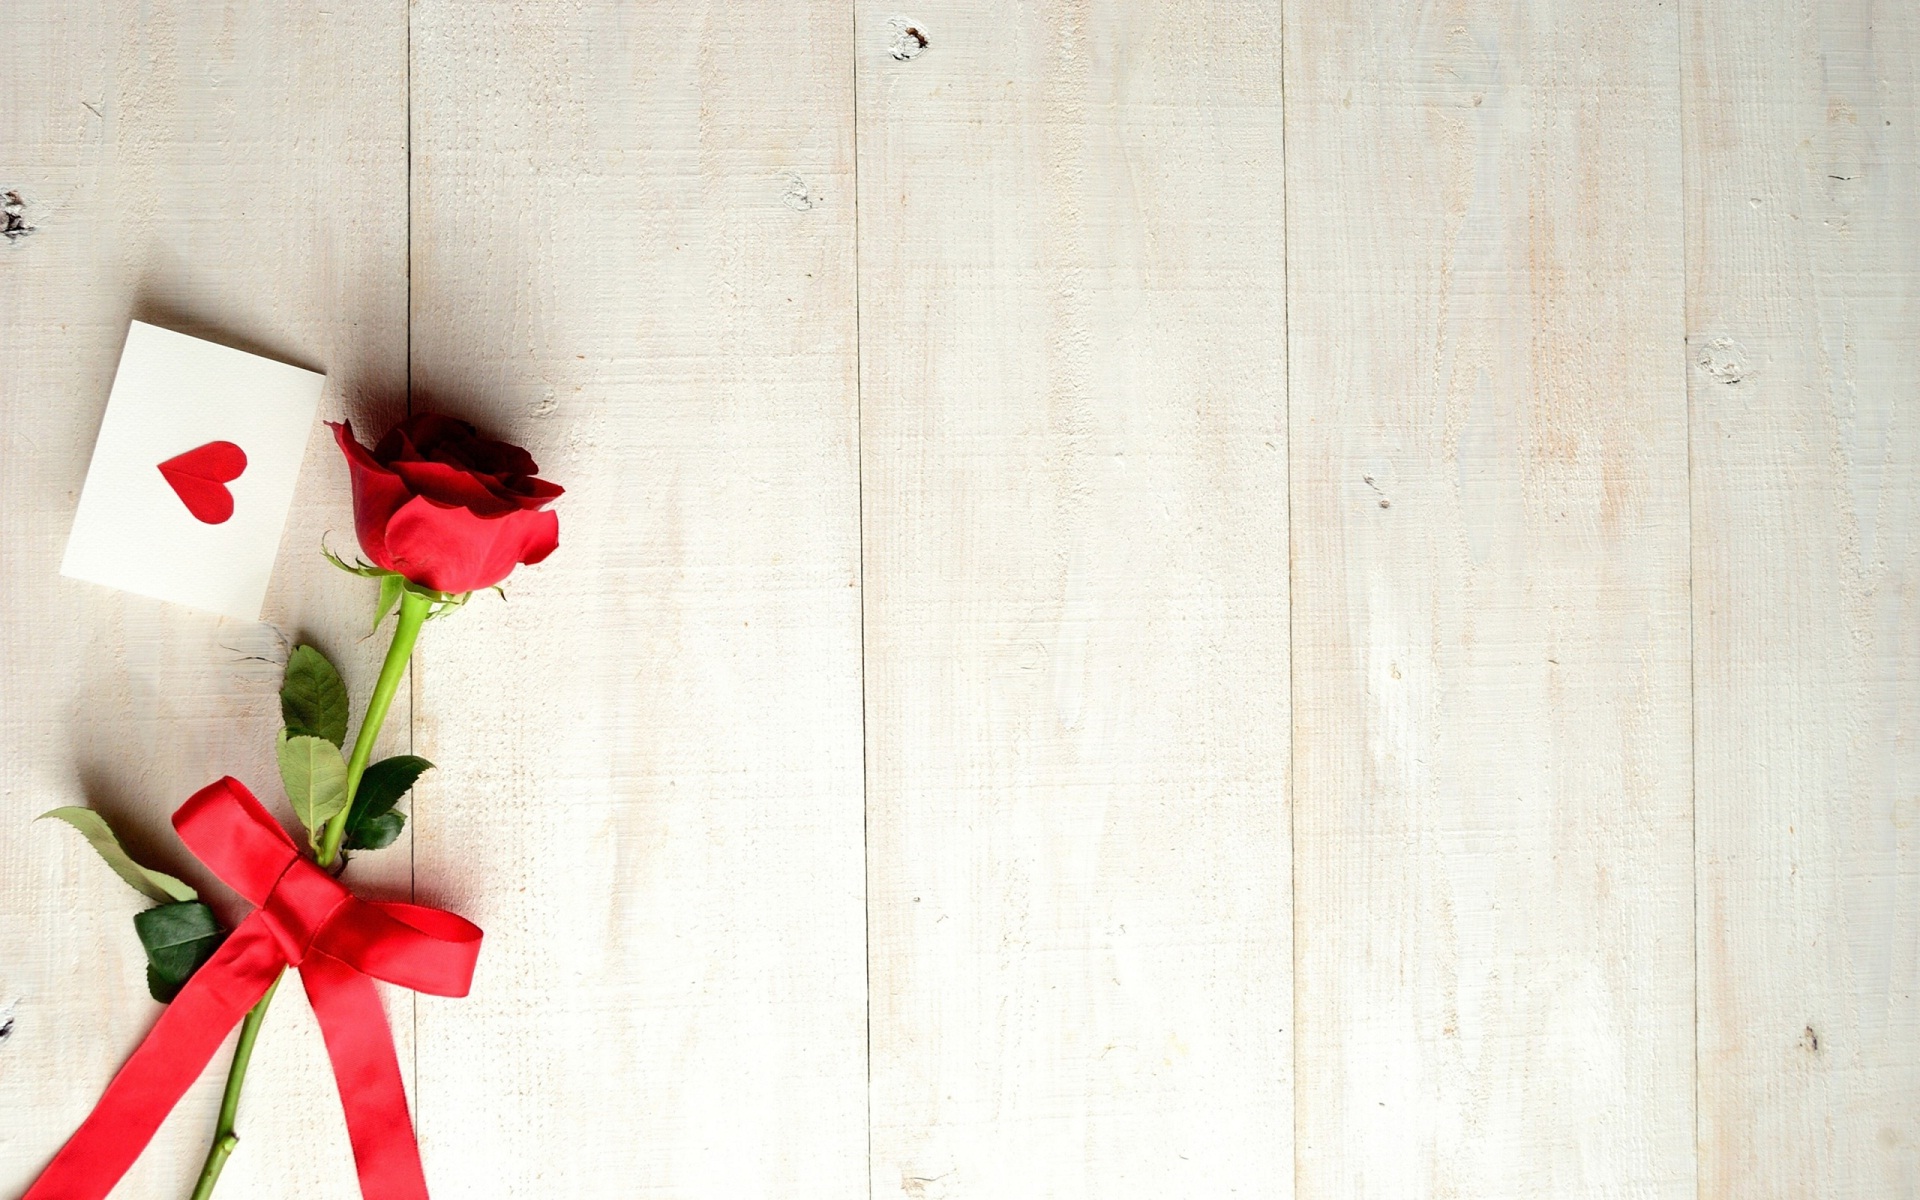 Love letter and red rose image | HD Wallpapers Rocks